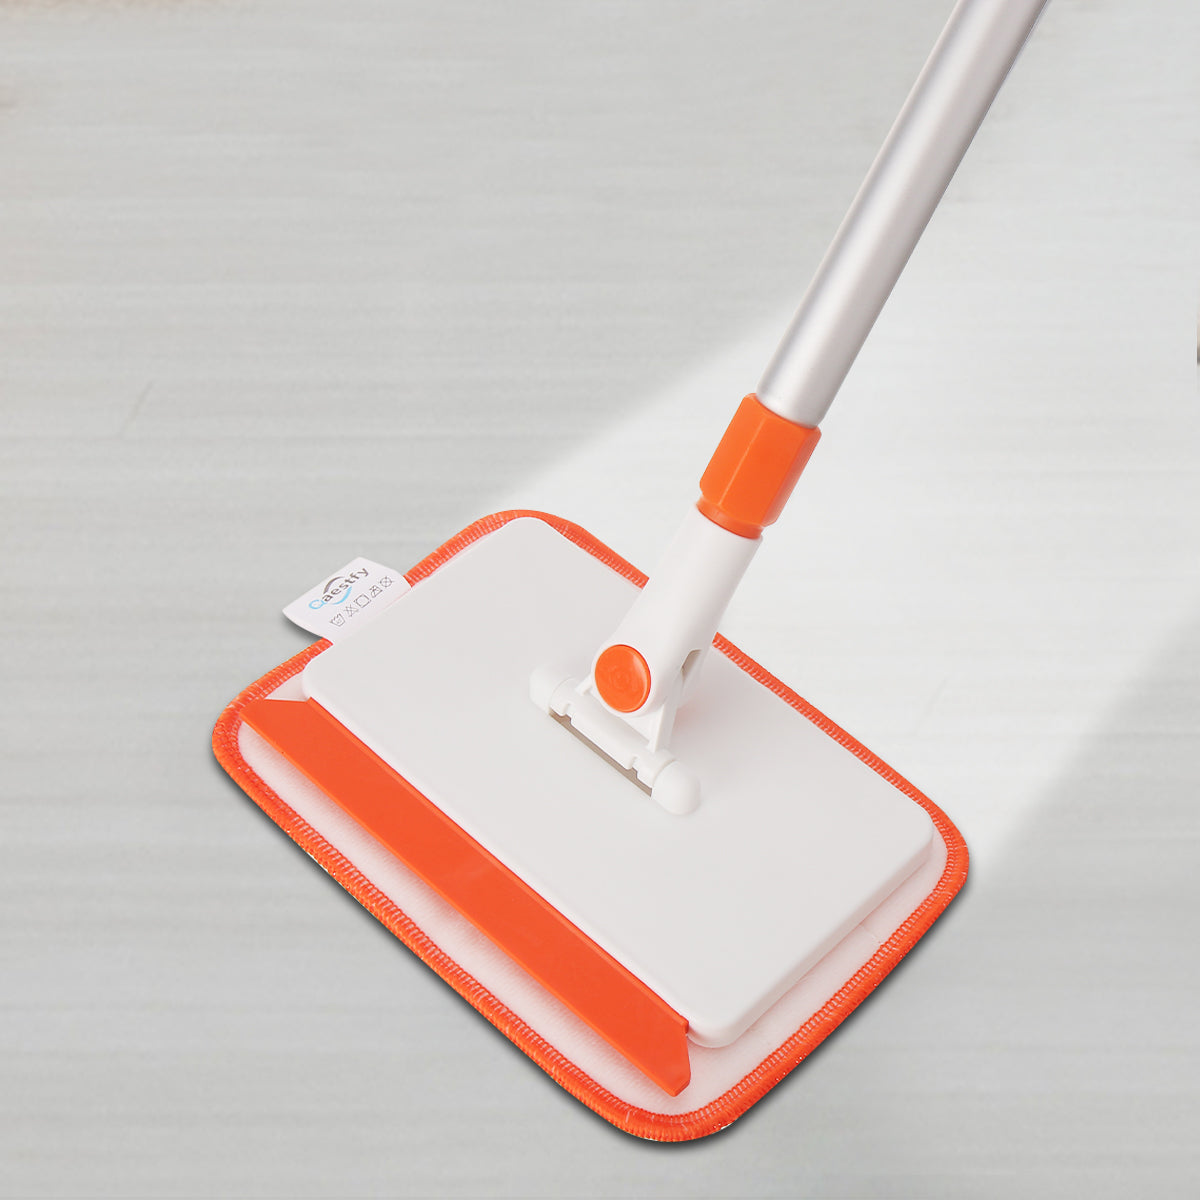 Baseboard Cleaning Gadget  Baseboard Buddy Review 